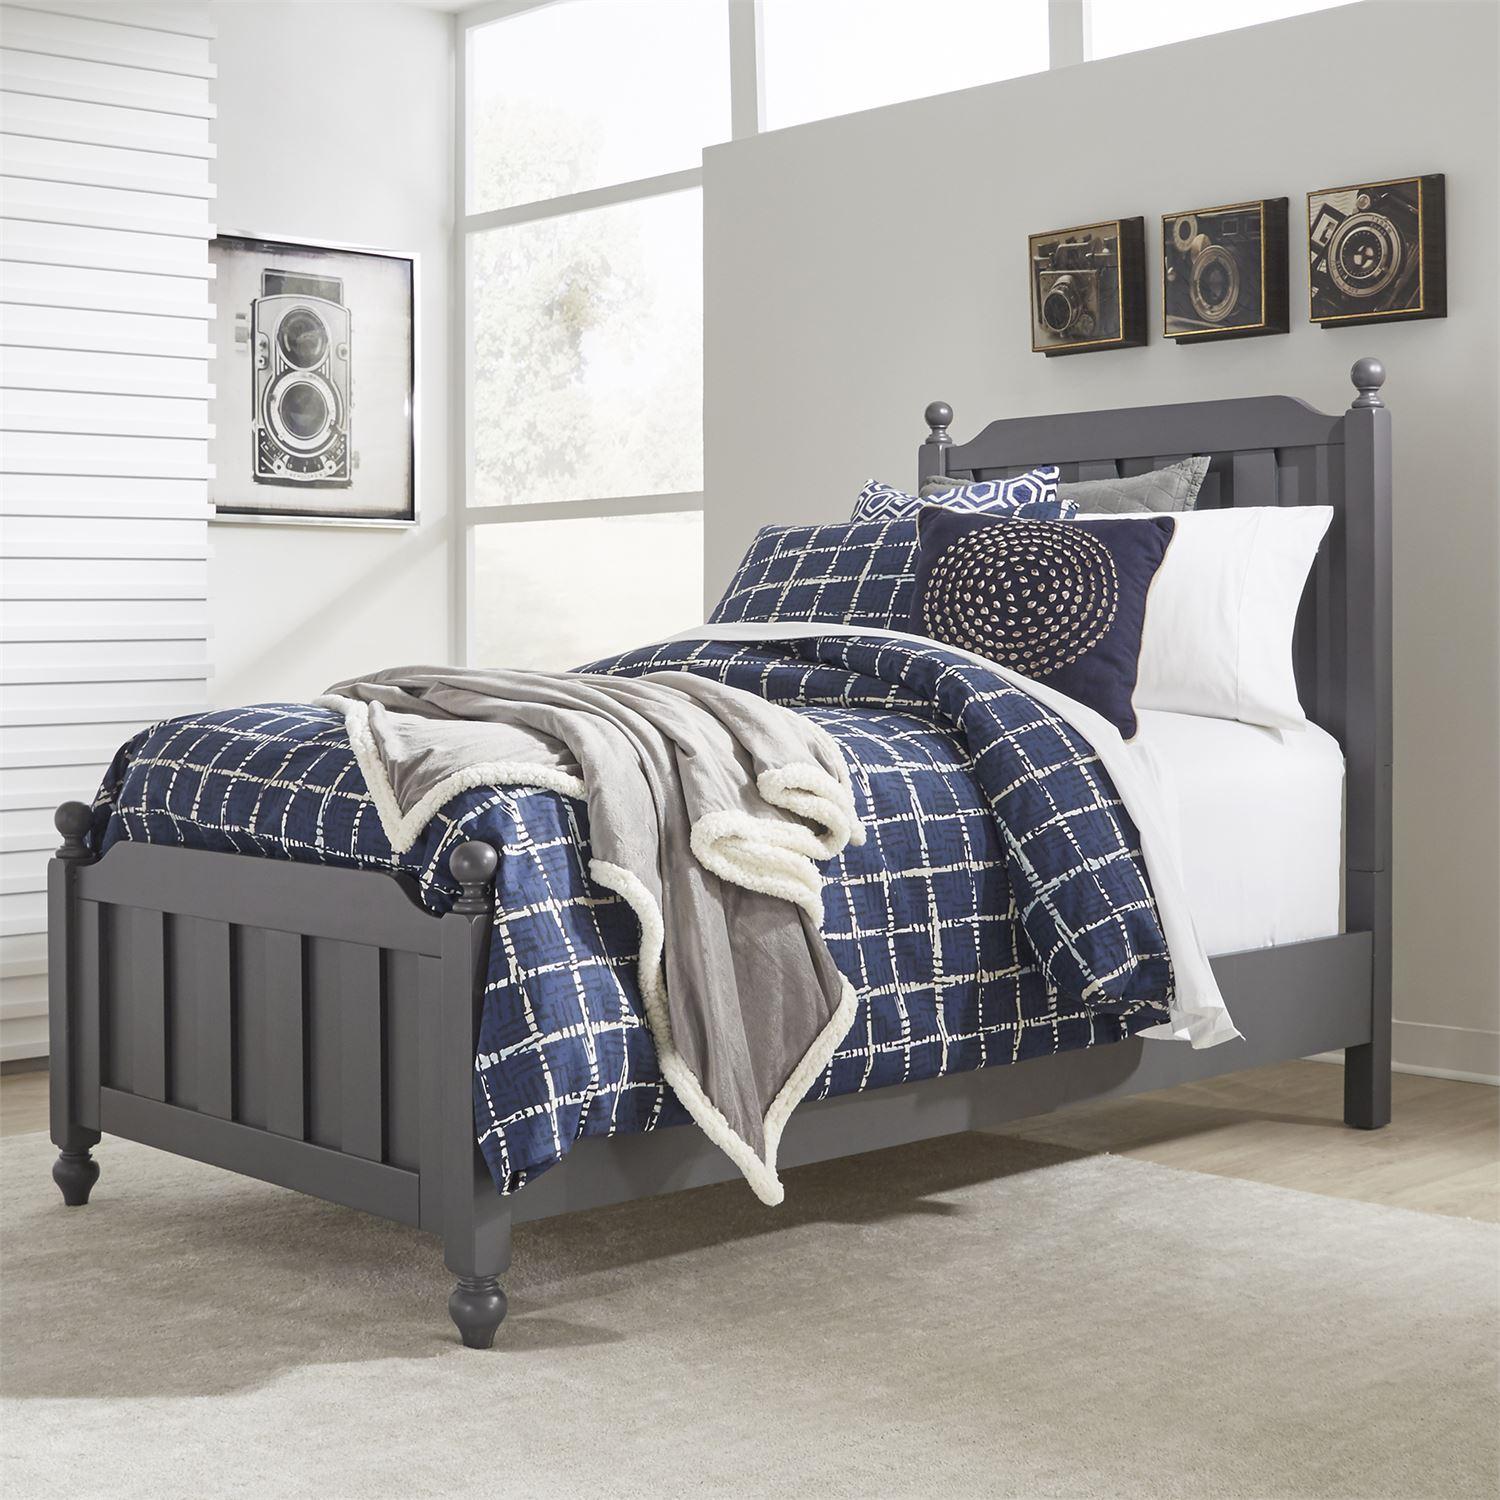 Cottage Panel Bed Cottage View  (423-YBR) Panel Bed 423-YBR-TPB in Gray 